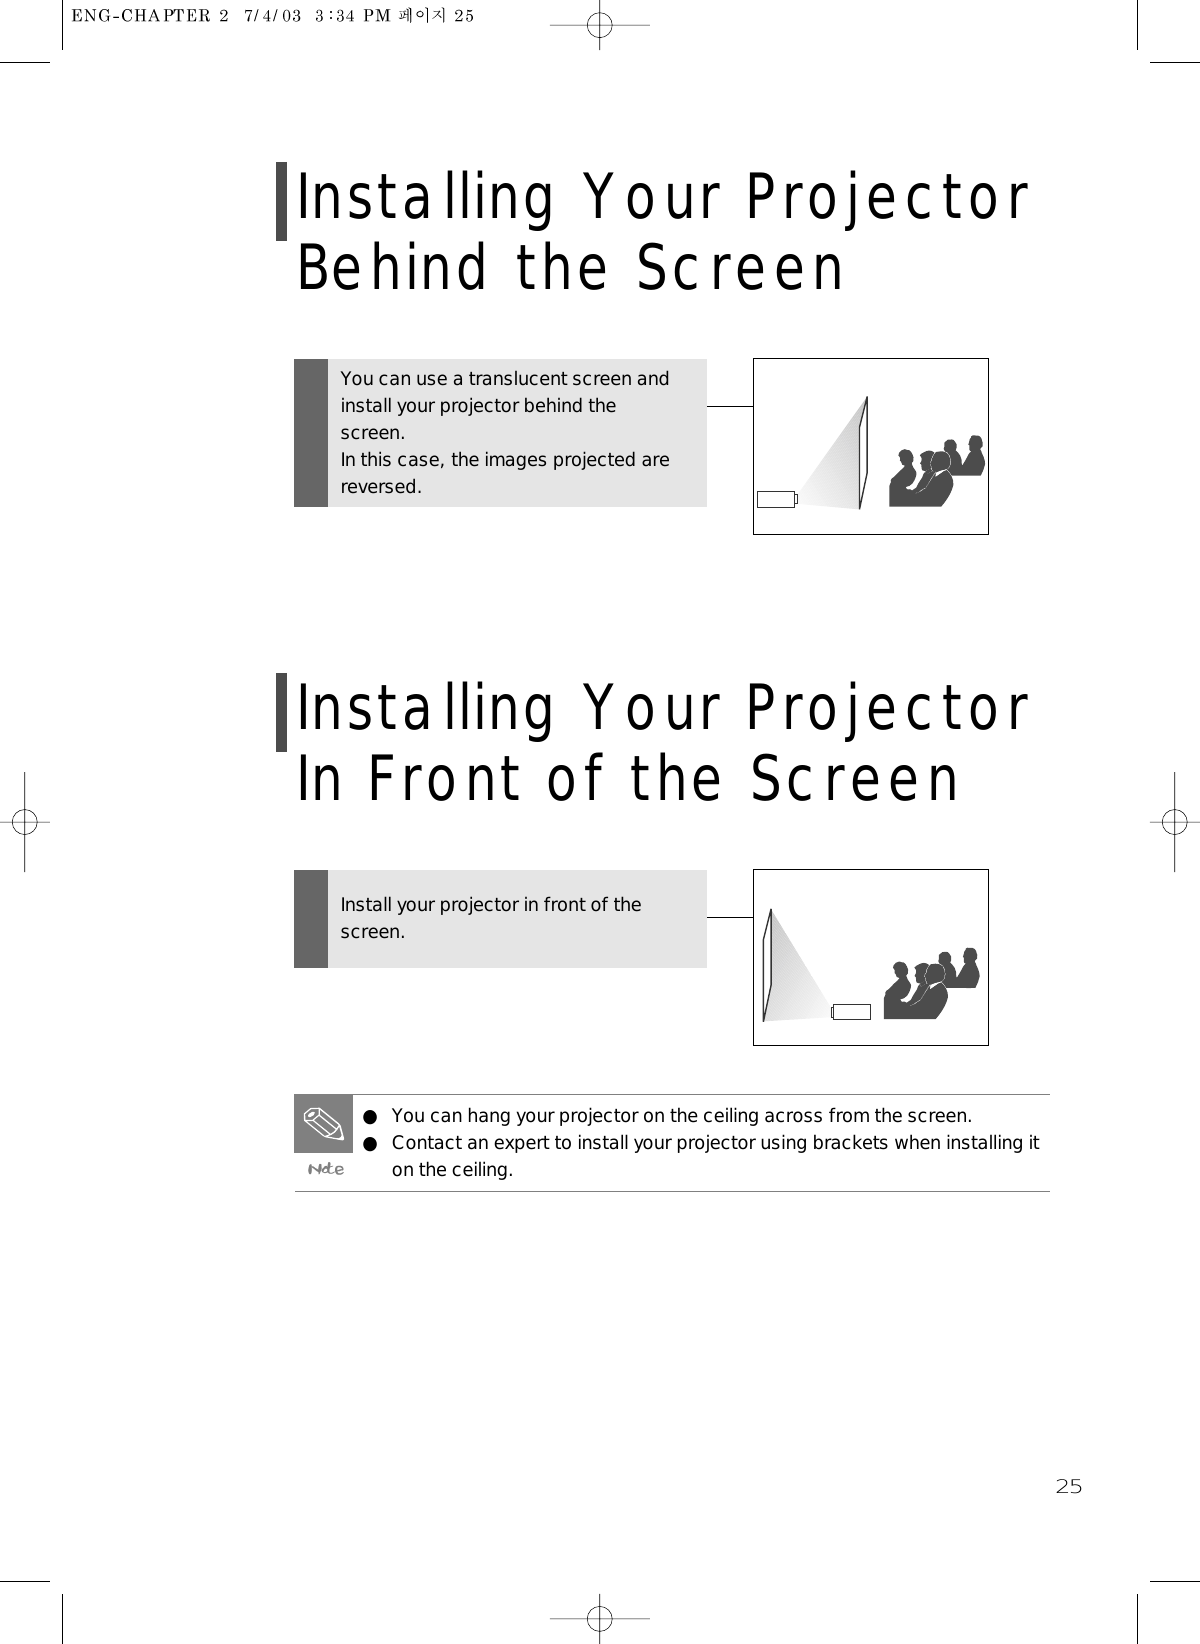 25Installing Your ProjectorBehind the ScreenYou can use a translucent screen andinstall your projector behind thescreen.In this case, the images projected arereversed.Installing Your ProjectorIn Front of the ScreenInstall your projector in front of thescreen.● You can hang your projector on the ceiling across from the screen.● Contact an expert to install your projector using brackets when installing iton the ceiling.